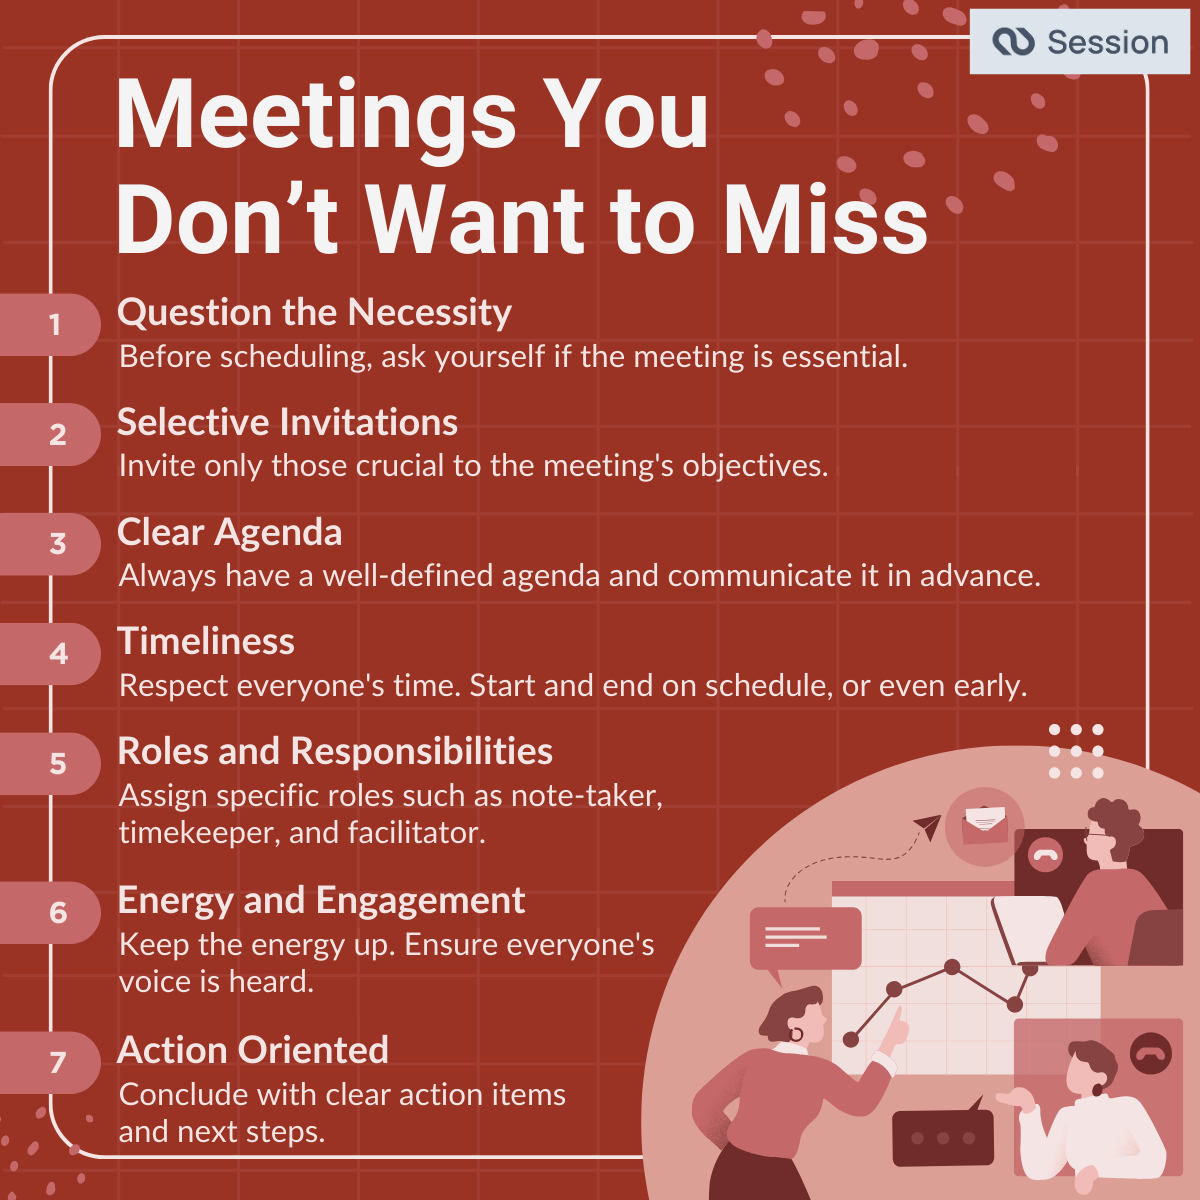 Illustration of 7 pieces of advice for Meetings You Don't Want to Miss